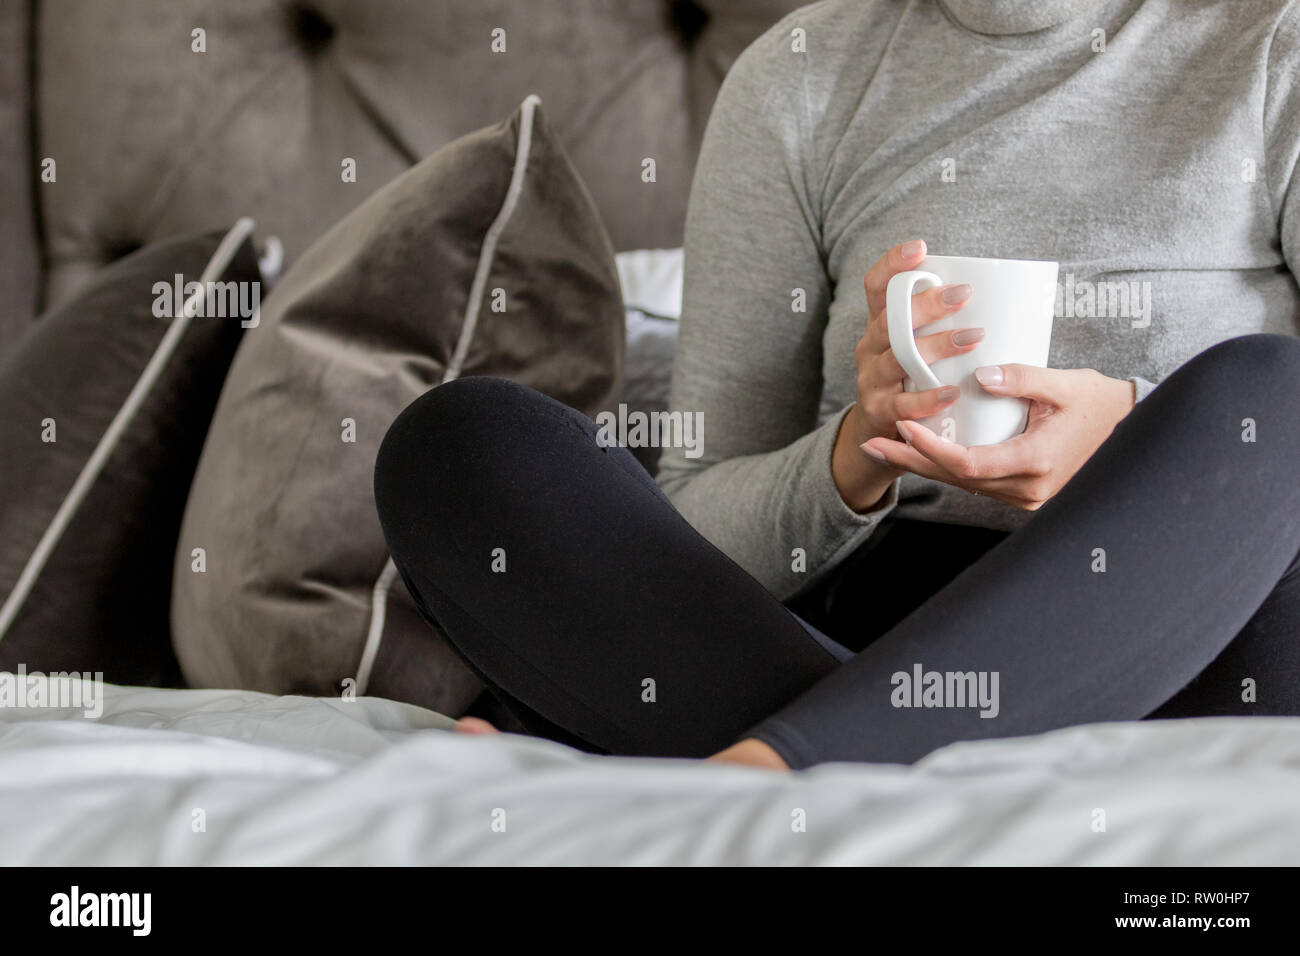 A young woman sitting on a bed with a white coffee mug Stock Photo